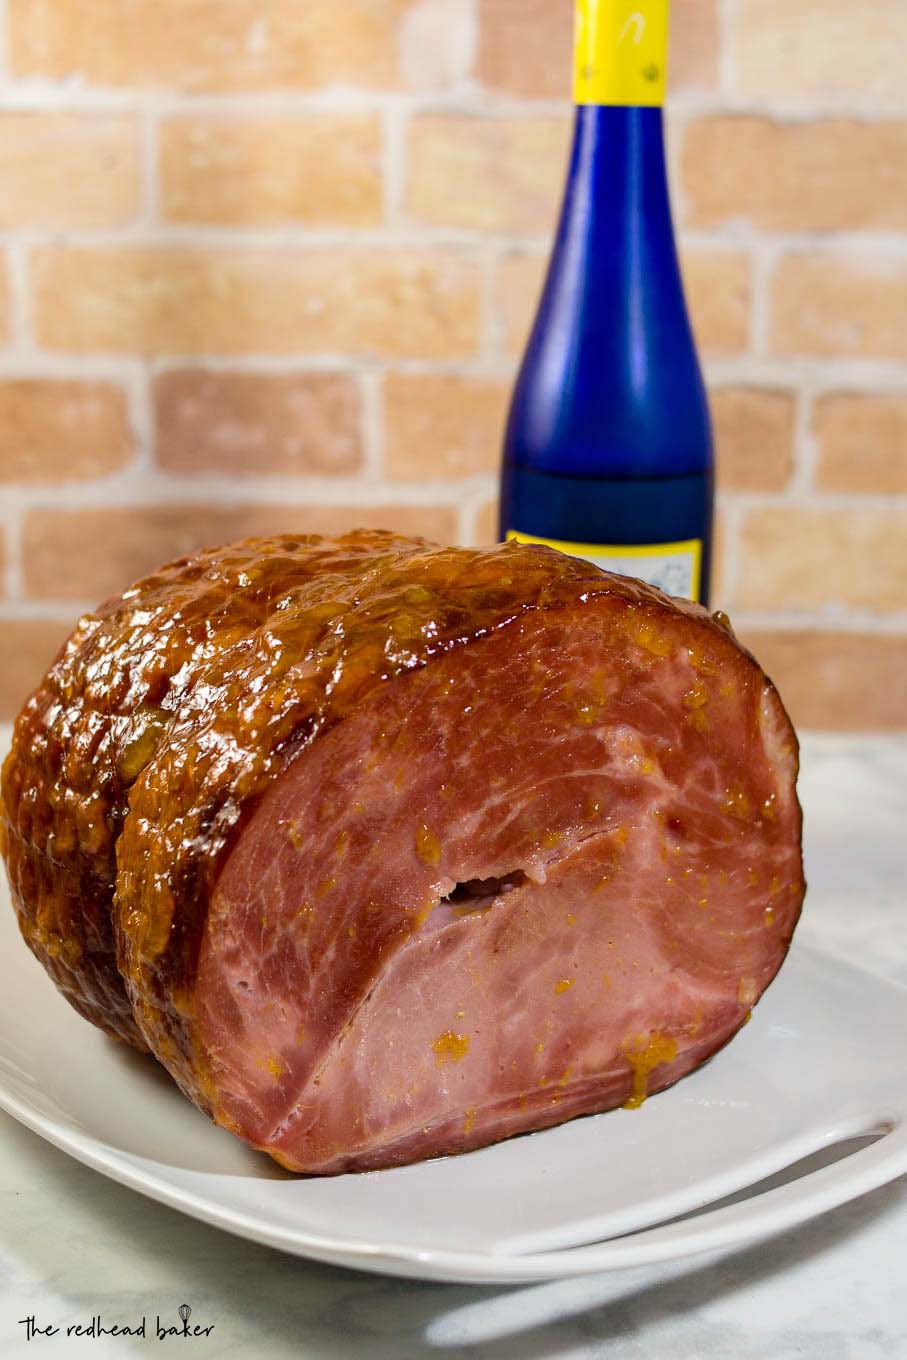 Tired of the same old ham recipes? Try Peach and Riesling Glazed Ham — it's fresh and fruity flavor will wow your brunch guests.